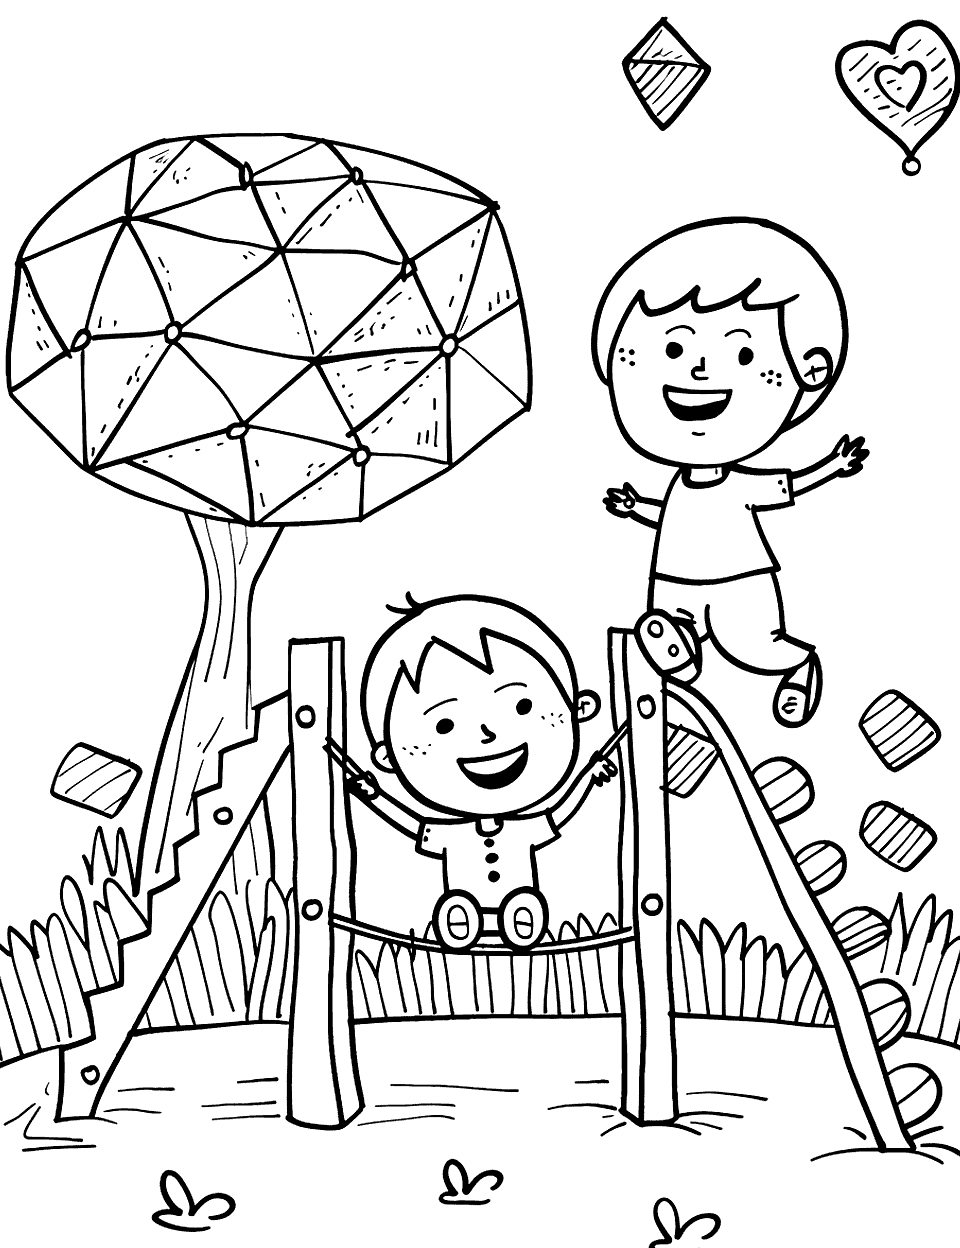 Geometric Jungle Gym Shapes Coloring Page - Kids playing on a playground with geometric shapes like hexagons and triangles for climbing.